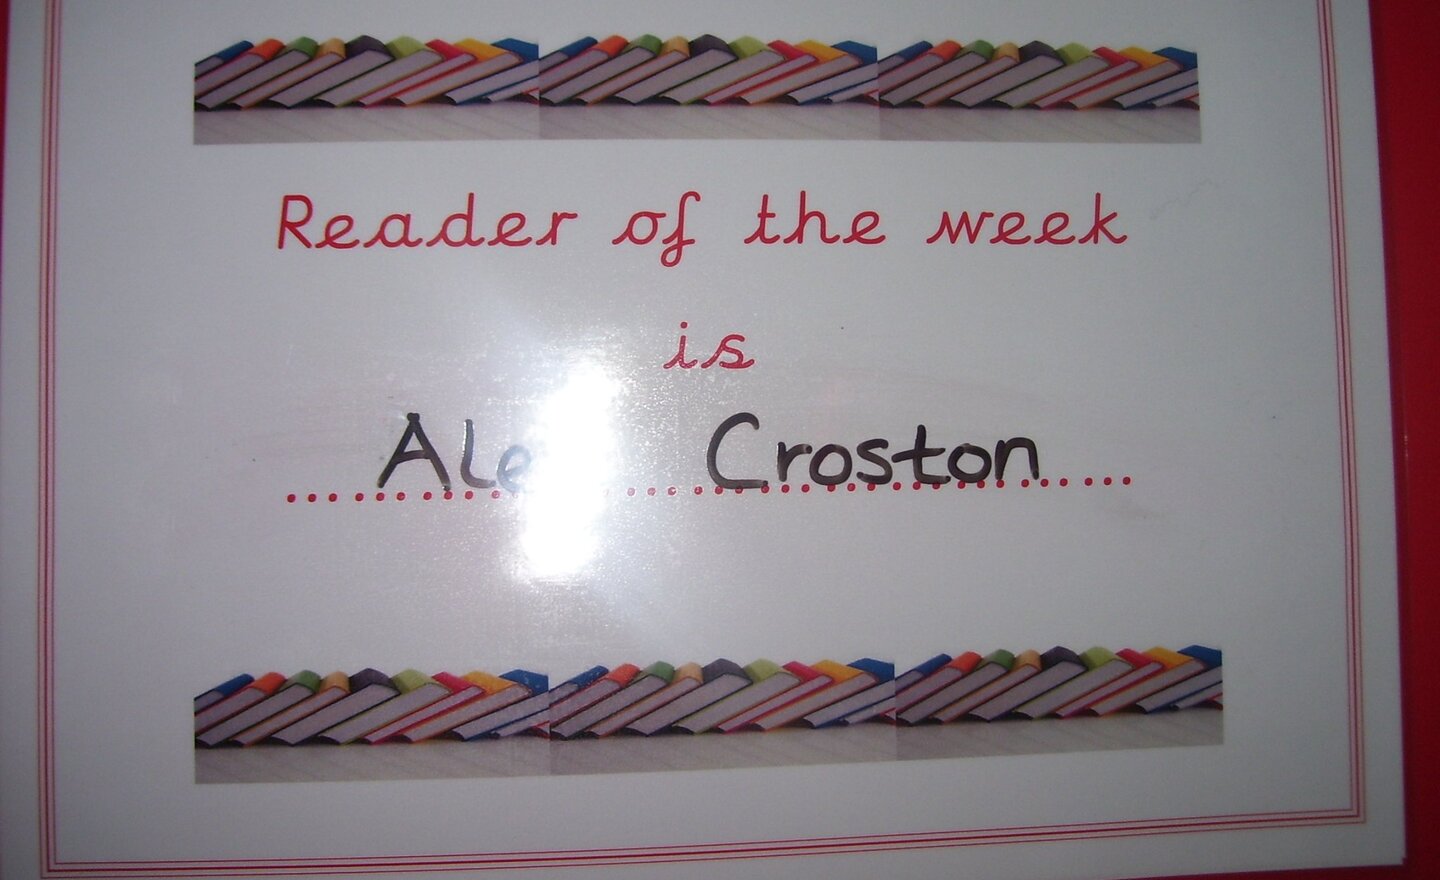 Image of Mrs Robinson's Reader of the Week